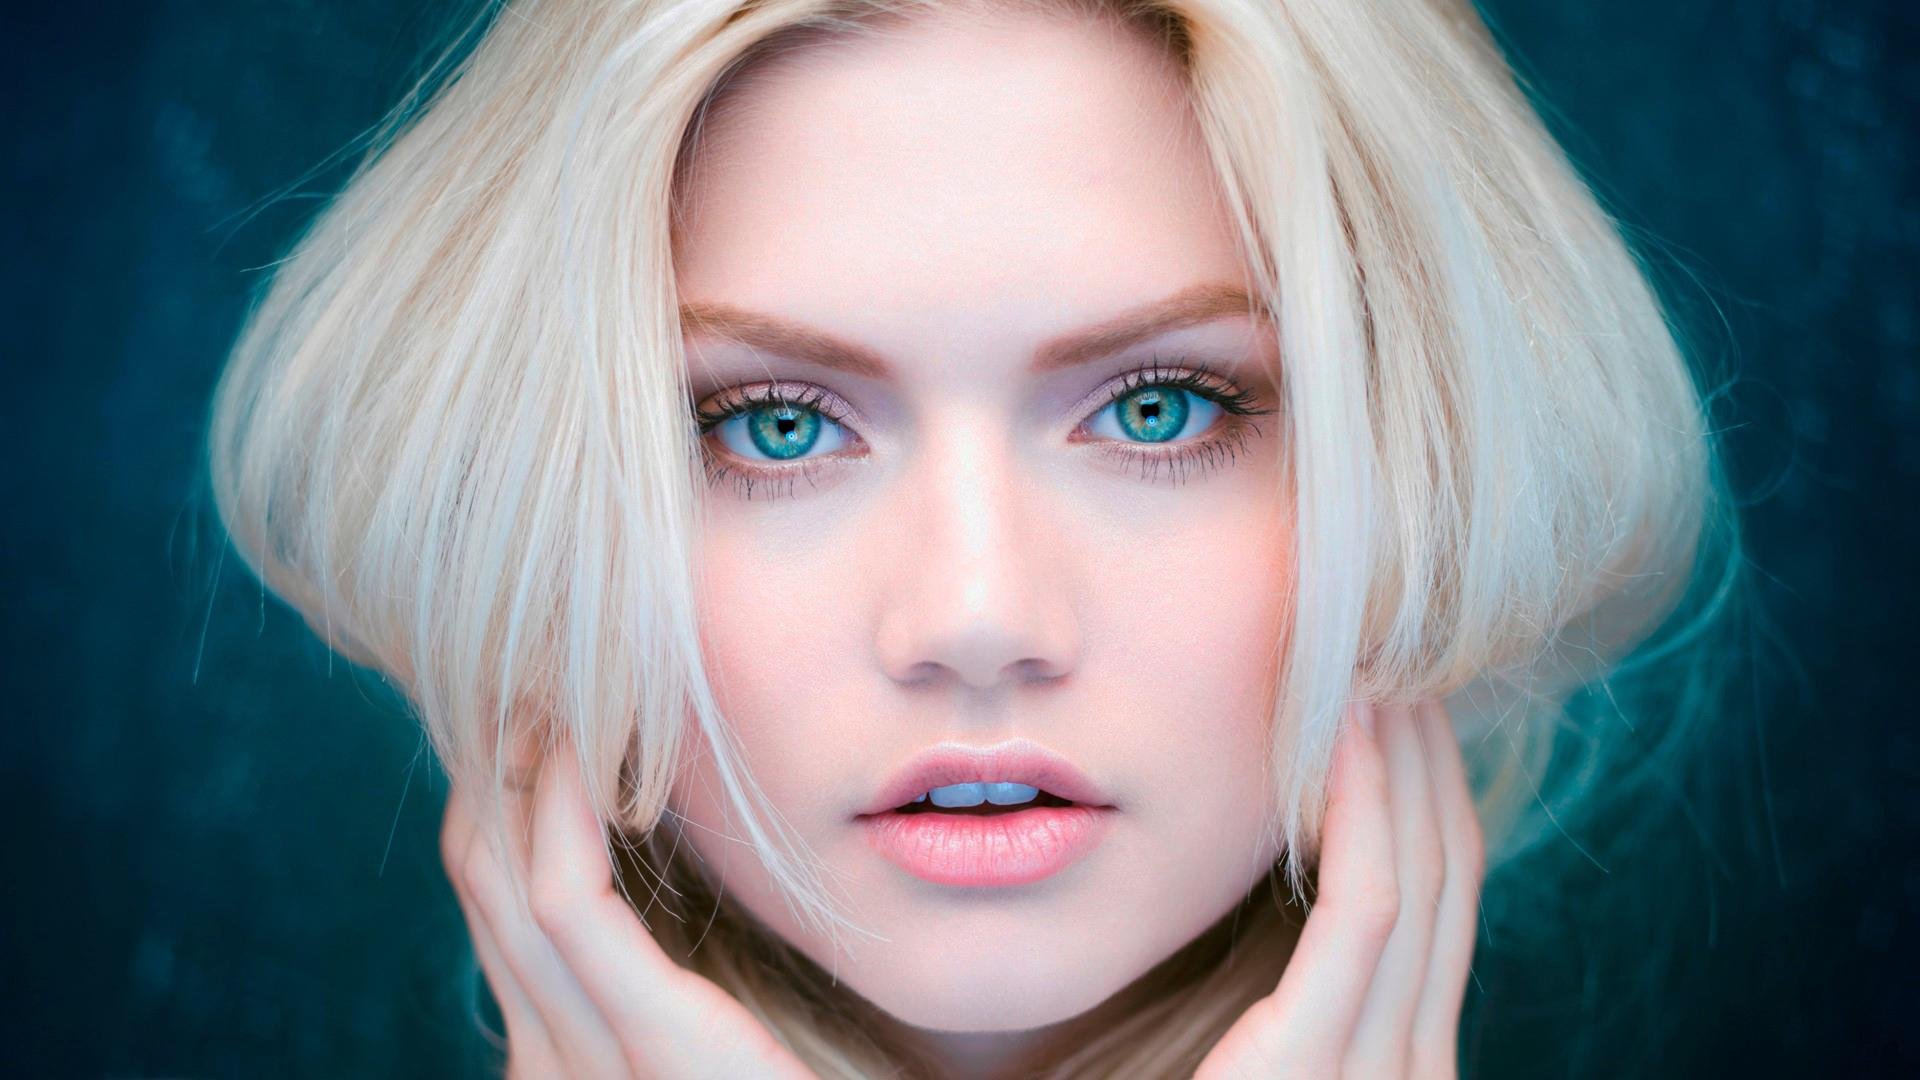 Blue-eyed model with dark hair and alluring features - wide 1